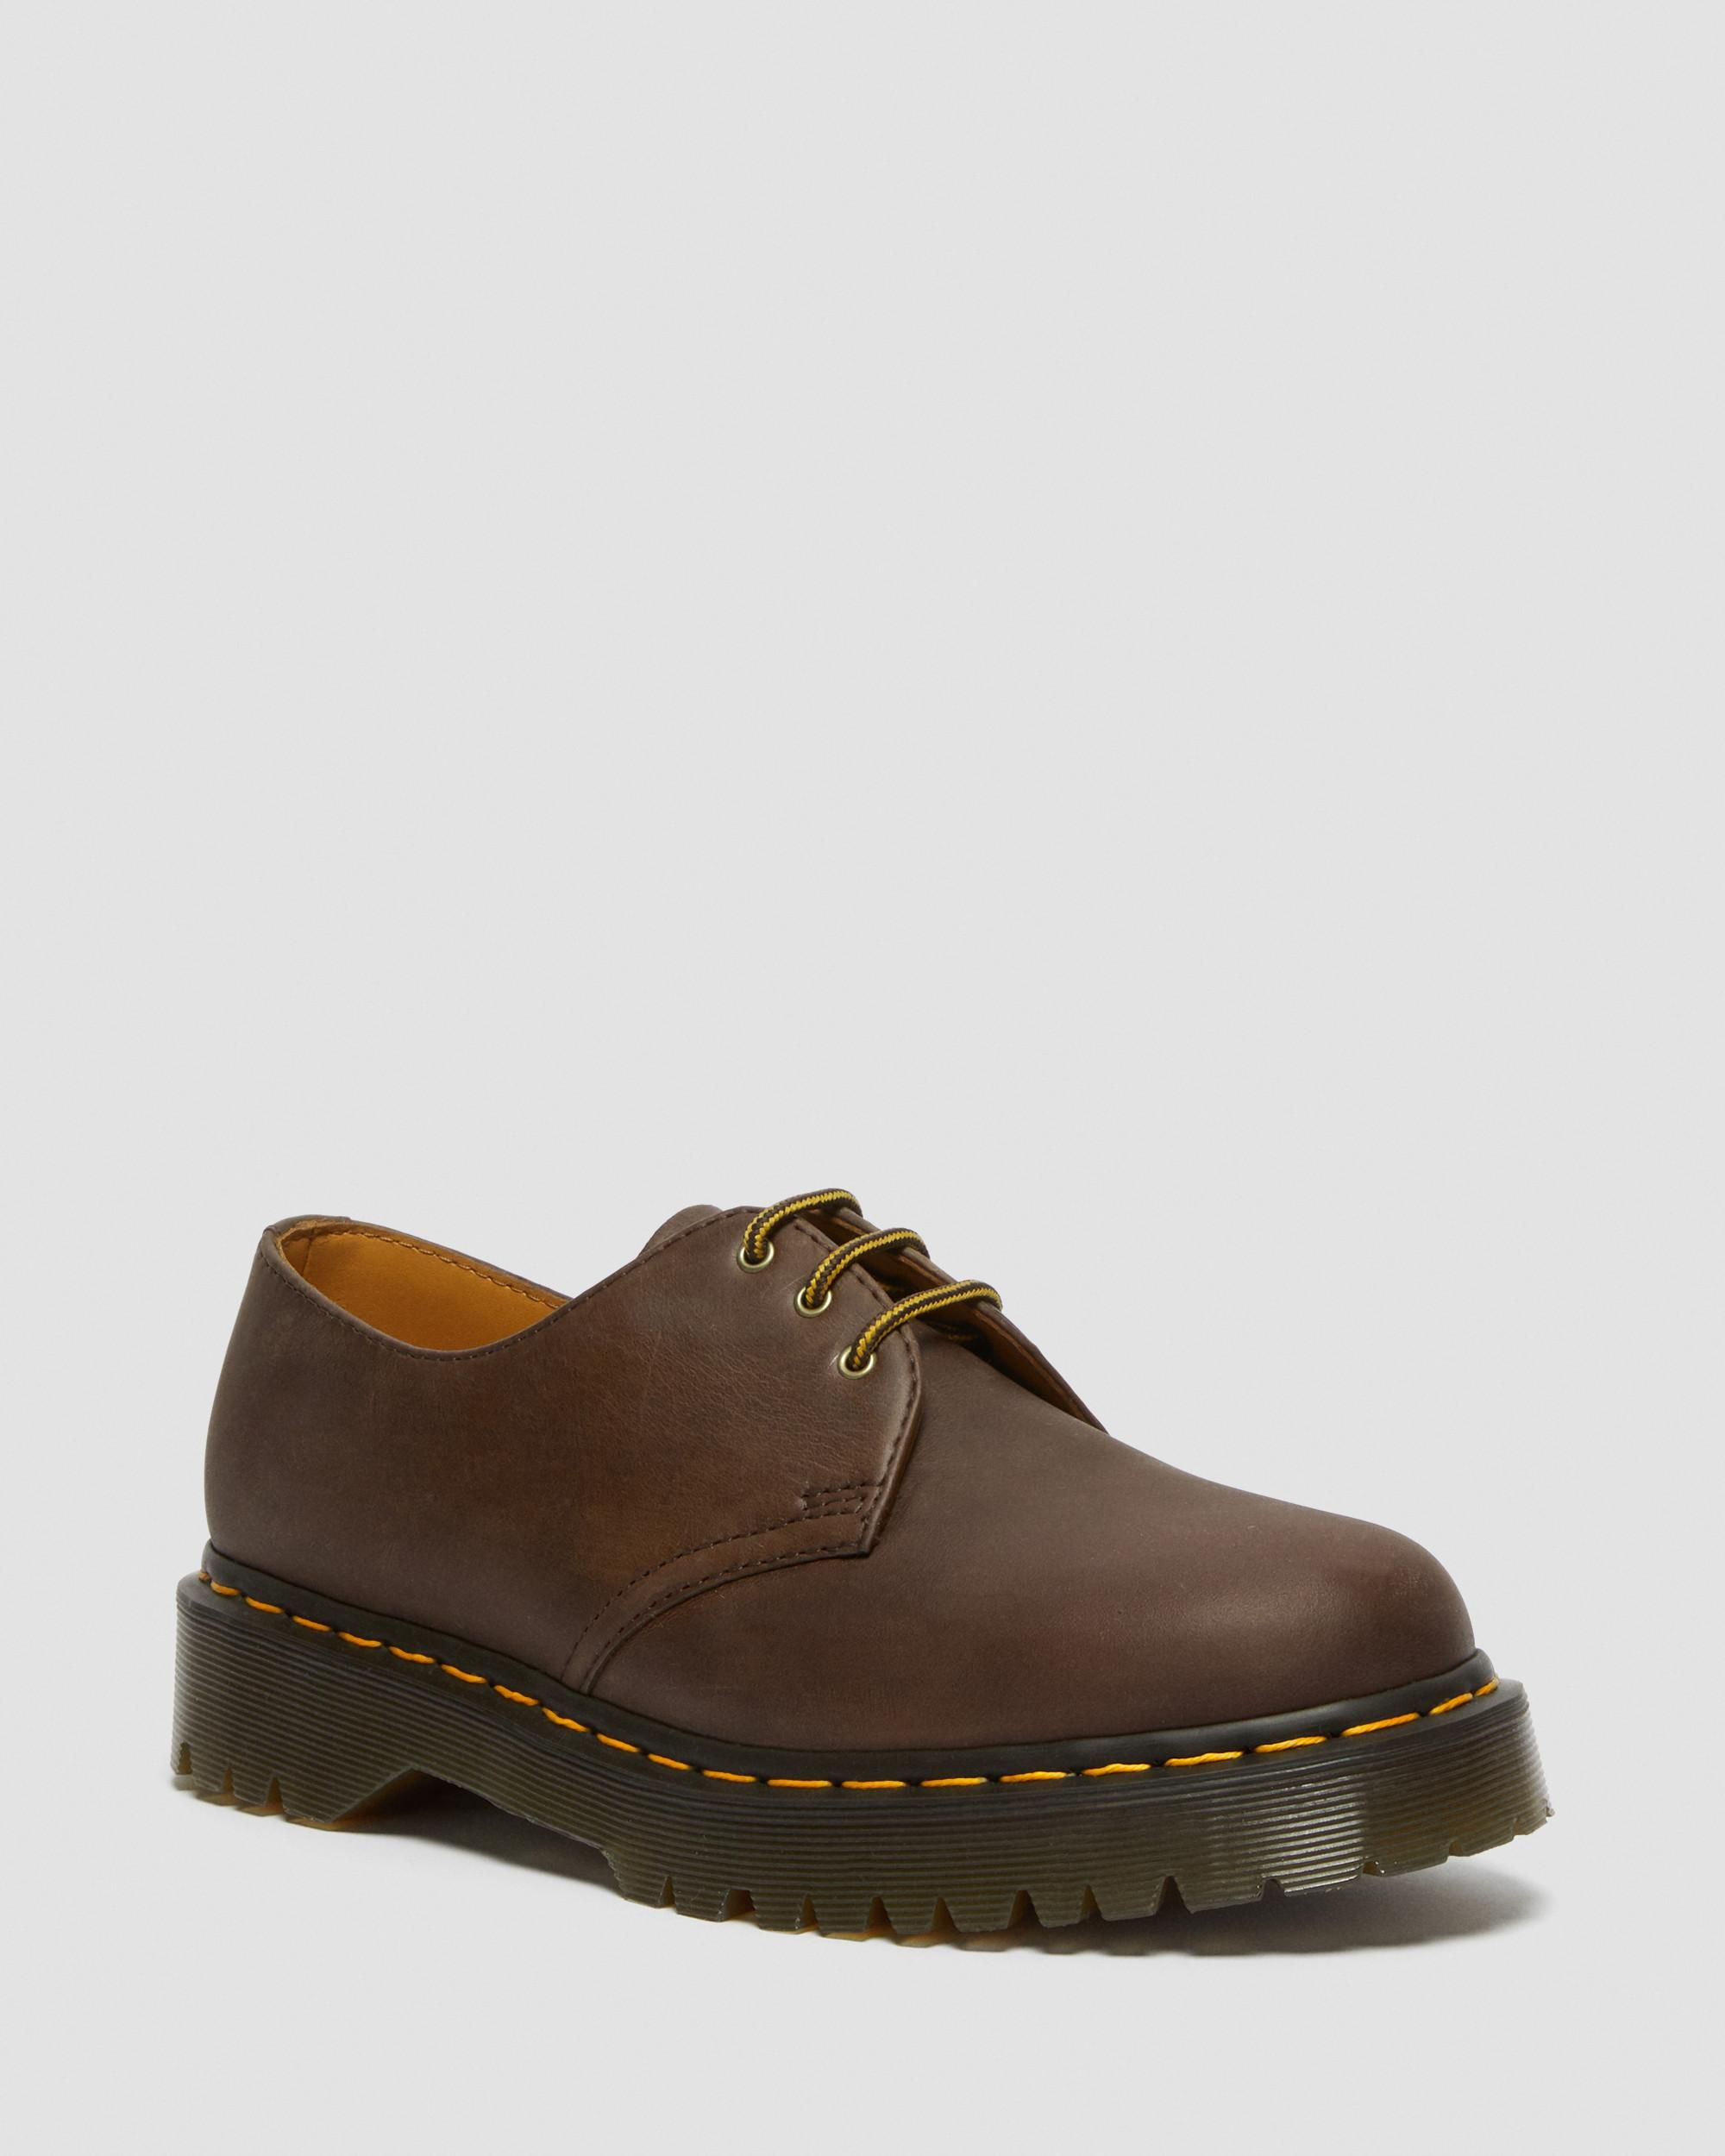 1461 Bex Crazy Horse Leather Oxford Shoes | Dr. Martens